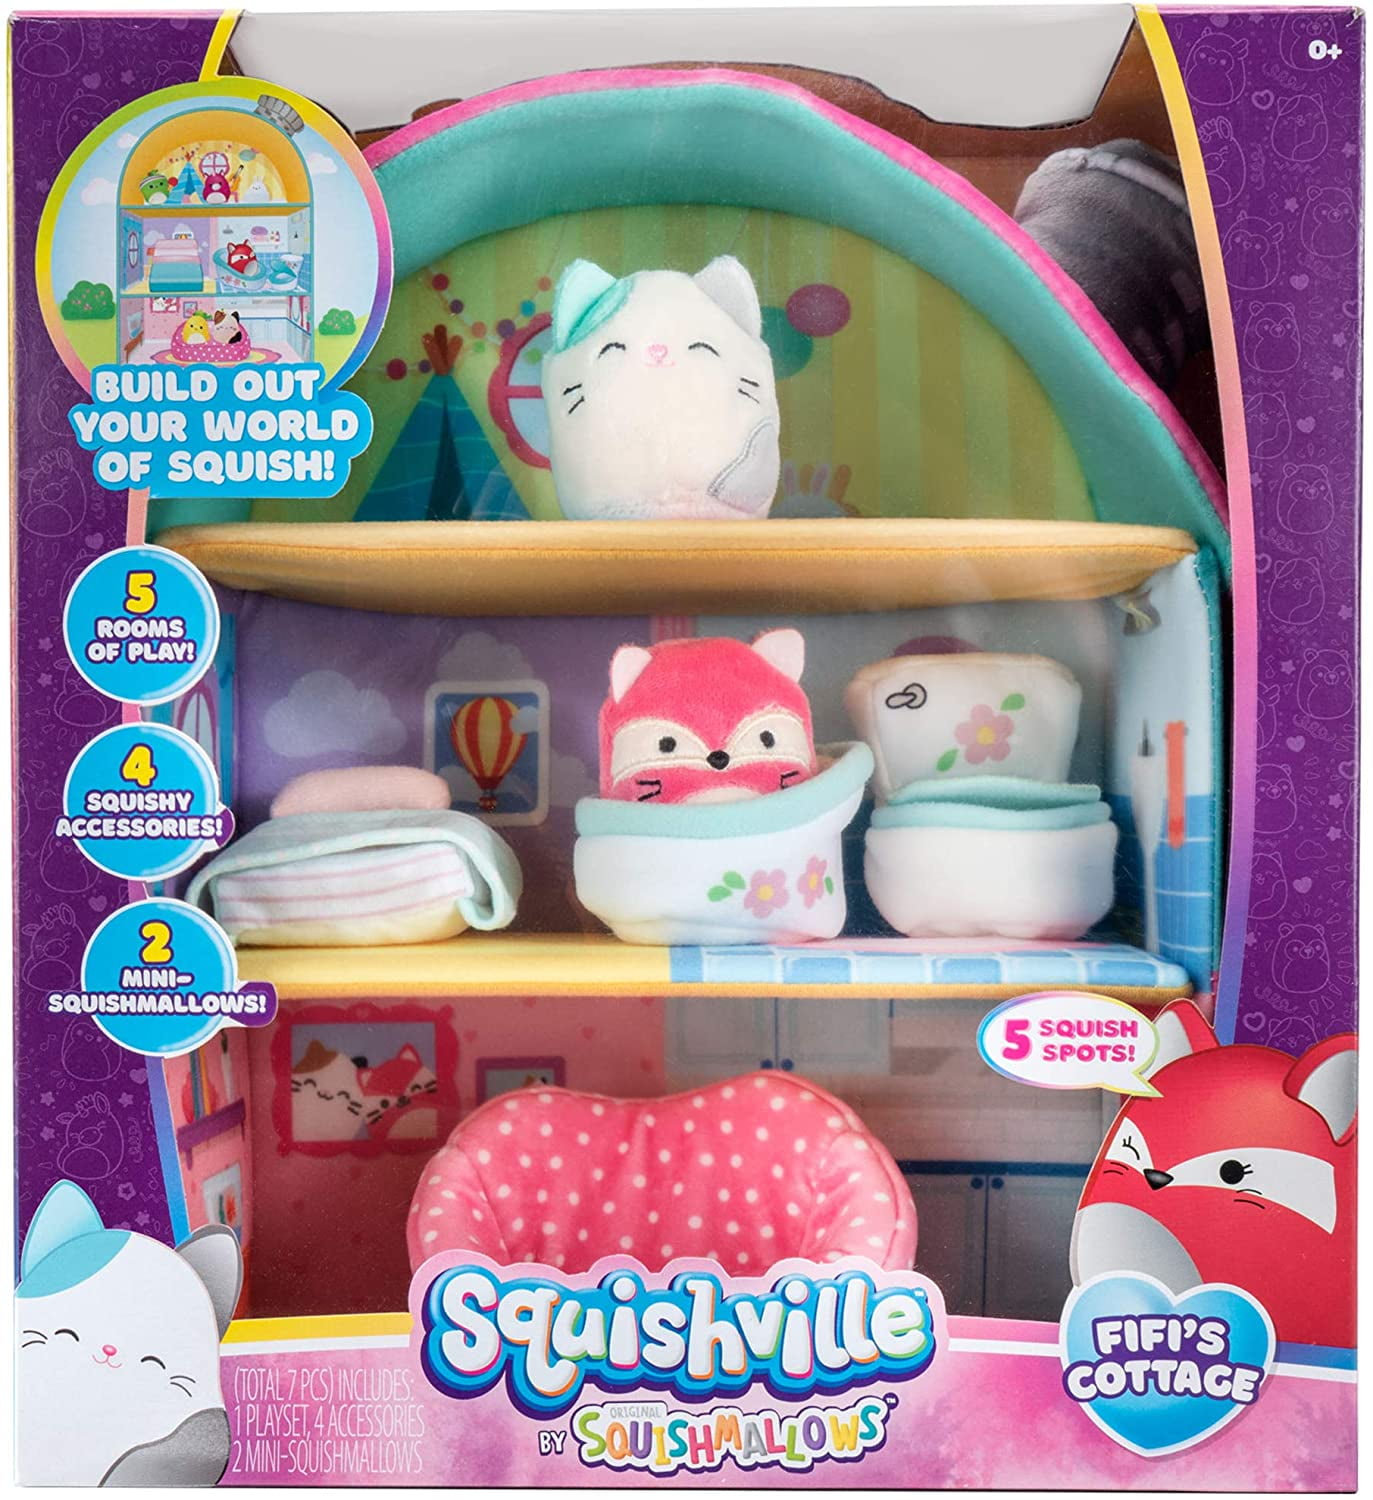 Squishville by Squishmallow Fifi's Cottage Townhouse, 2” Blair and Fifi  Soft Mini-Squishmallow and 4 Plush Furniture Accessories, Irresistibly Soft